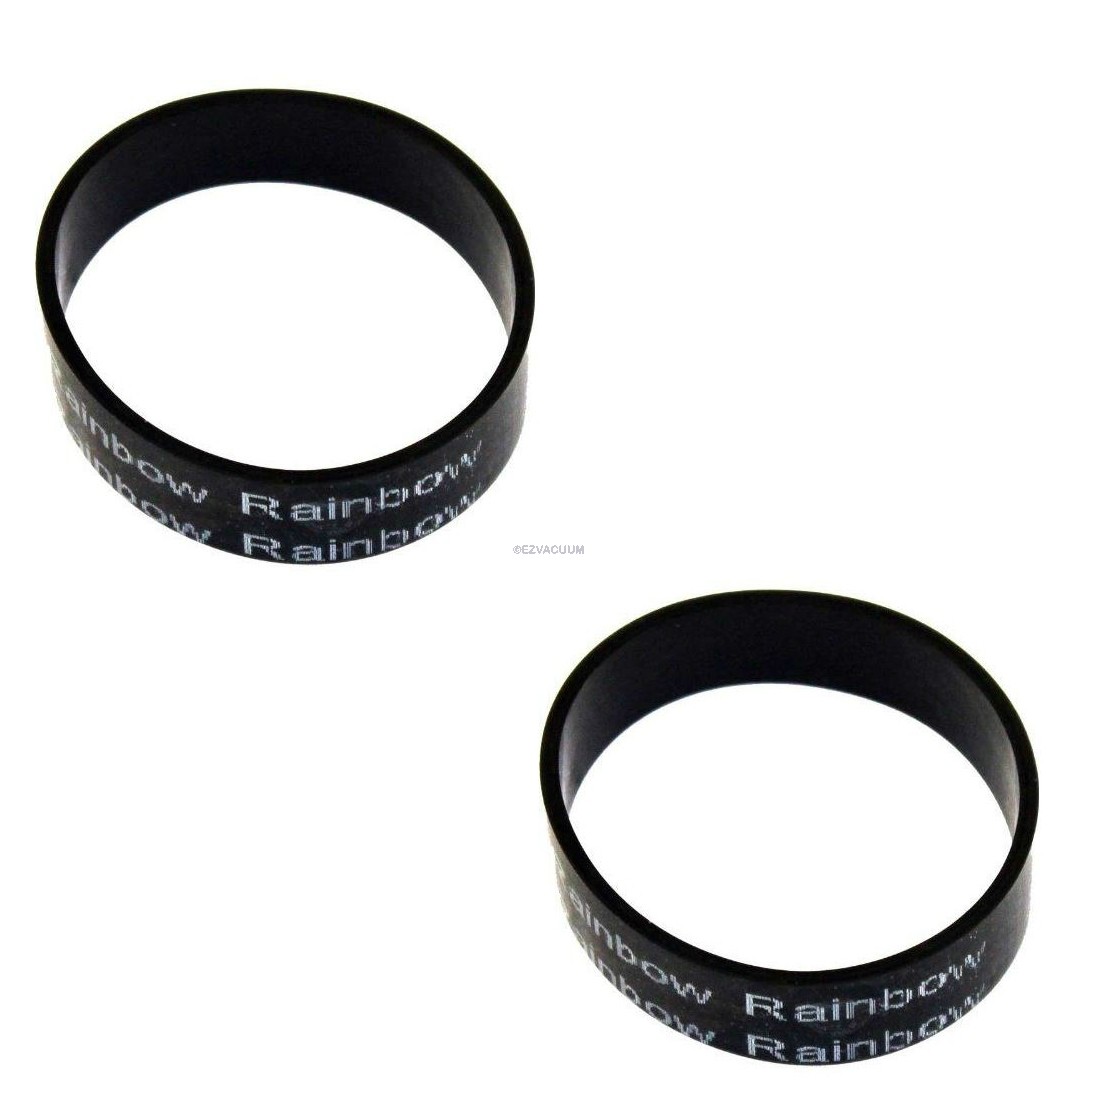 2 Replacement Belts for Rainbow Rexair Vacuum Cleaner 